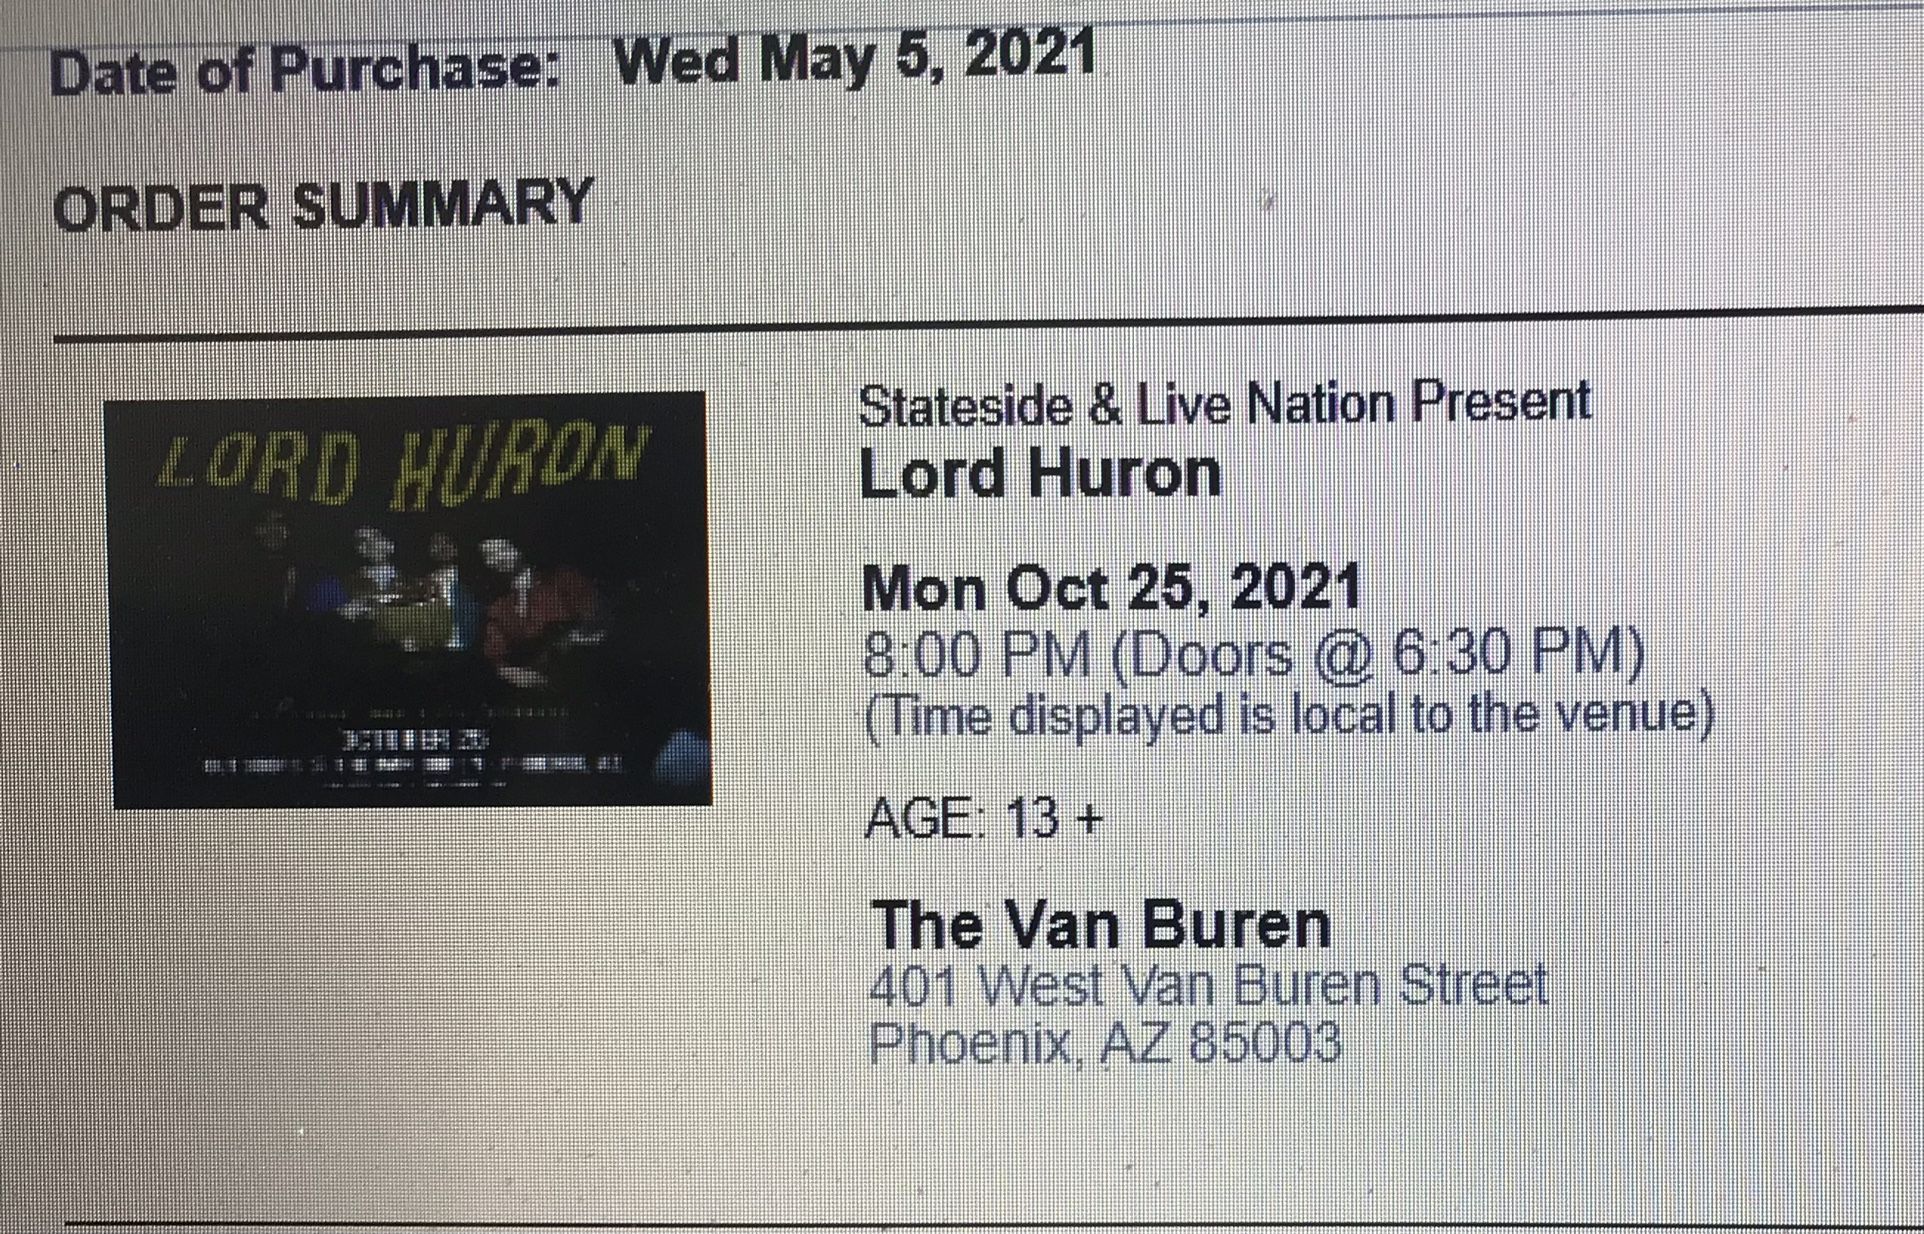 Lord Huron Tickets